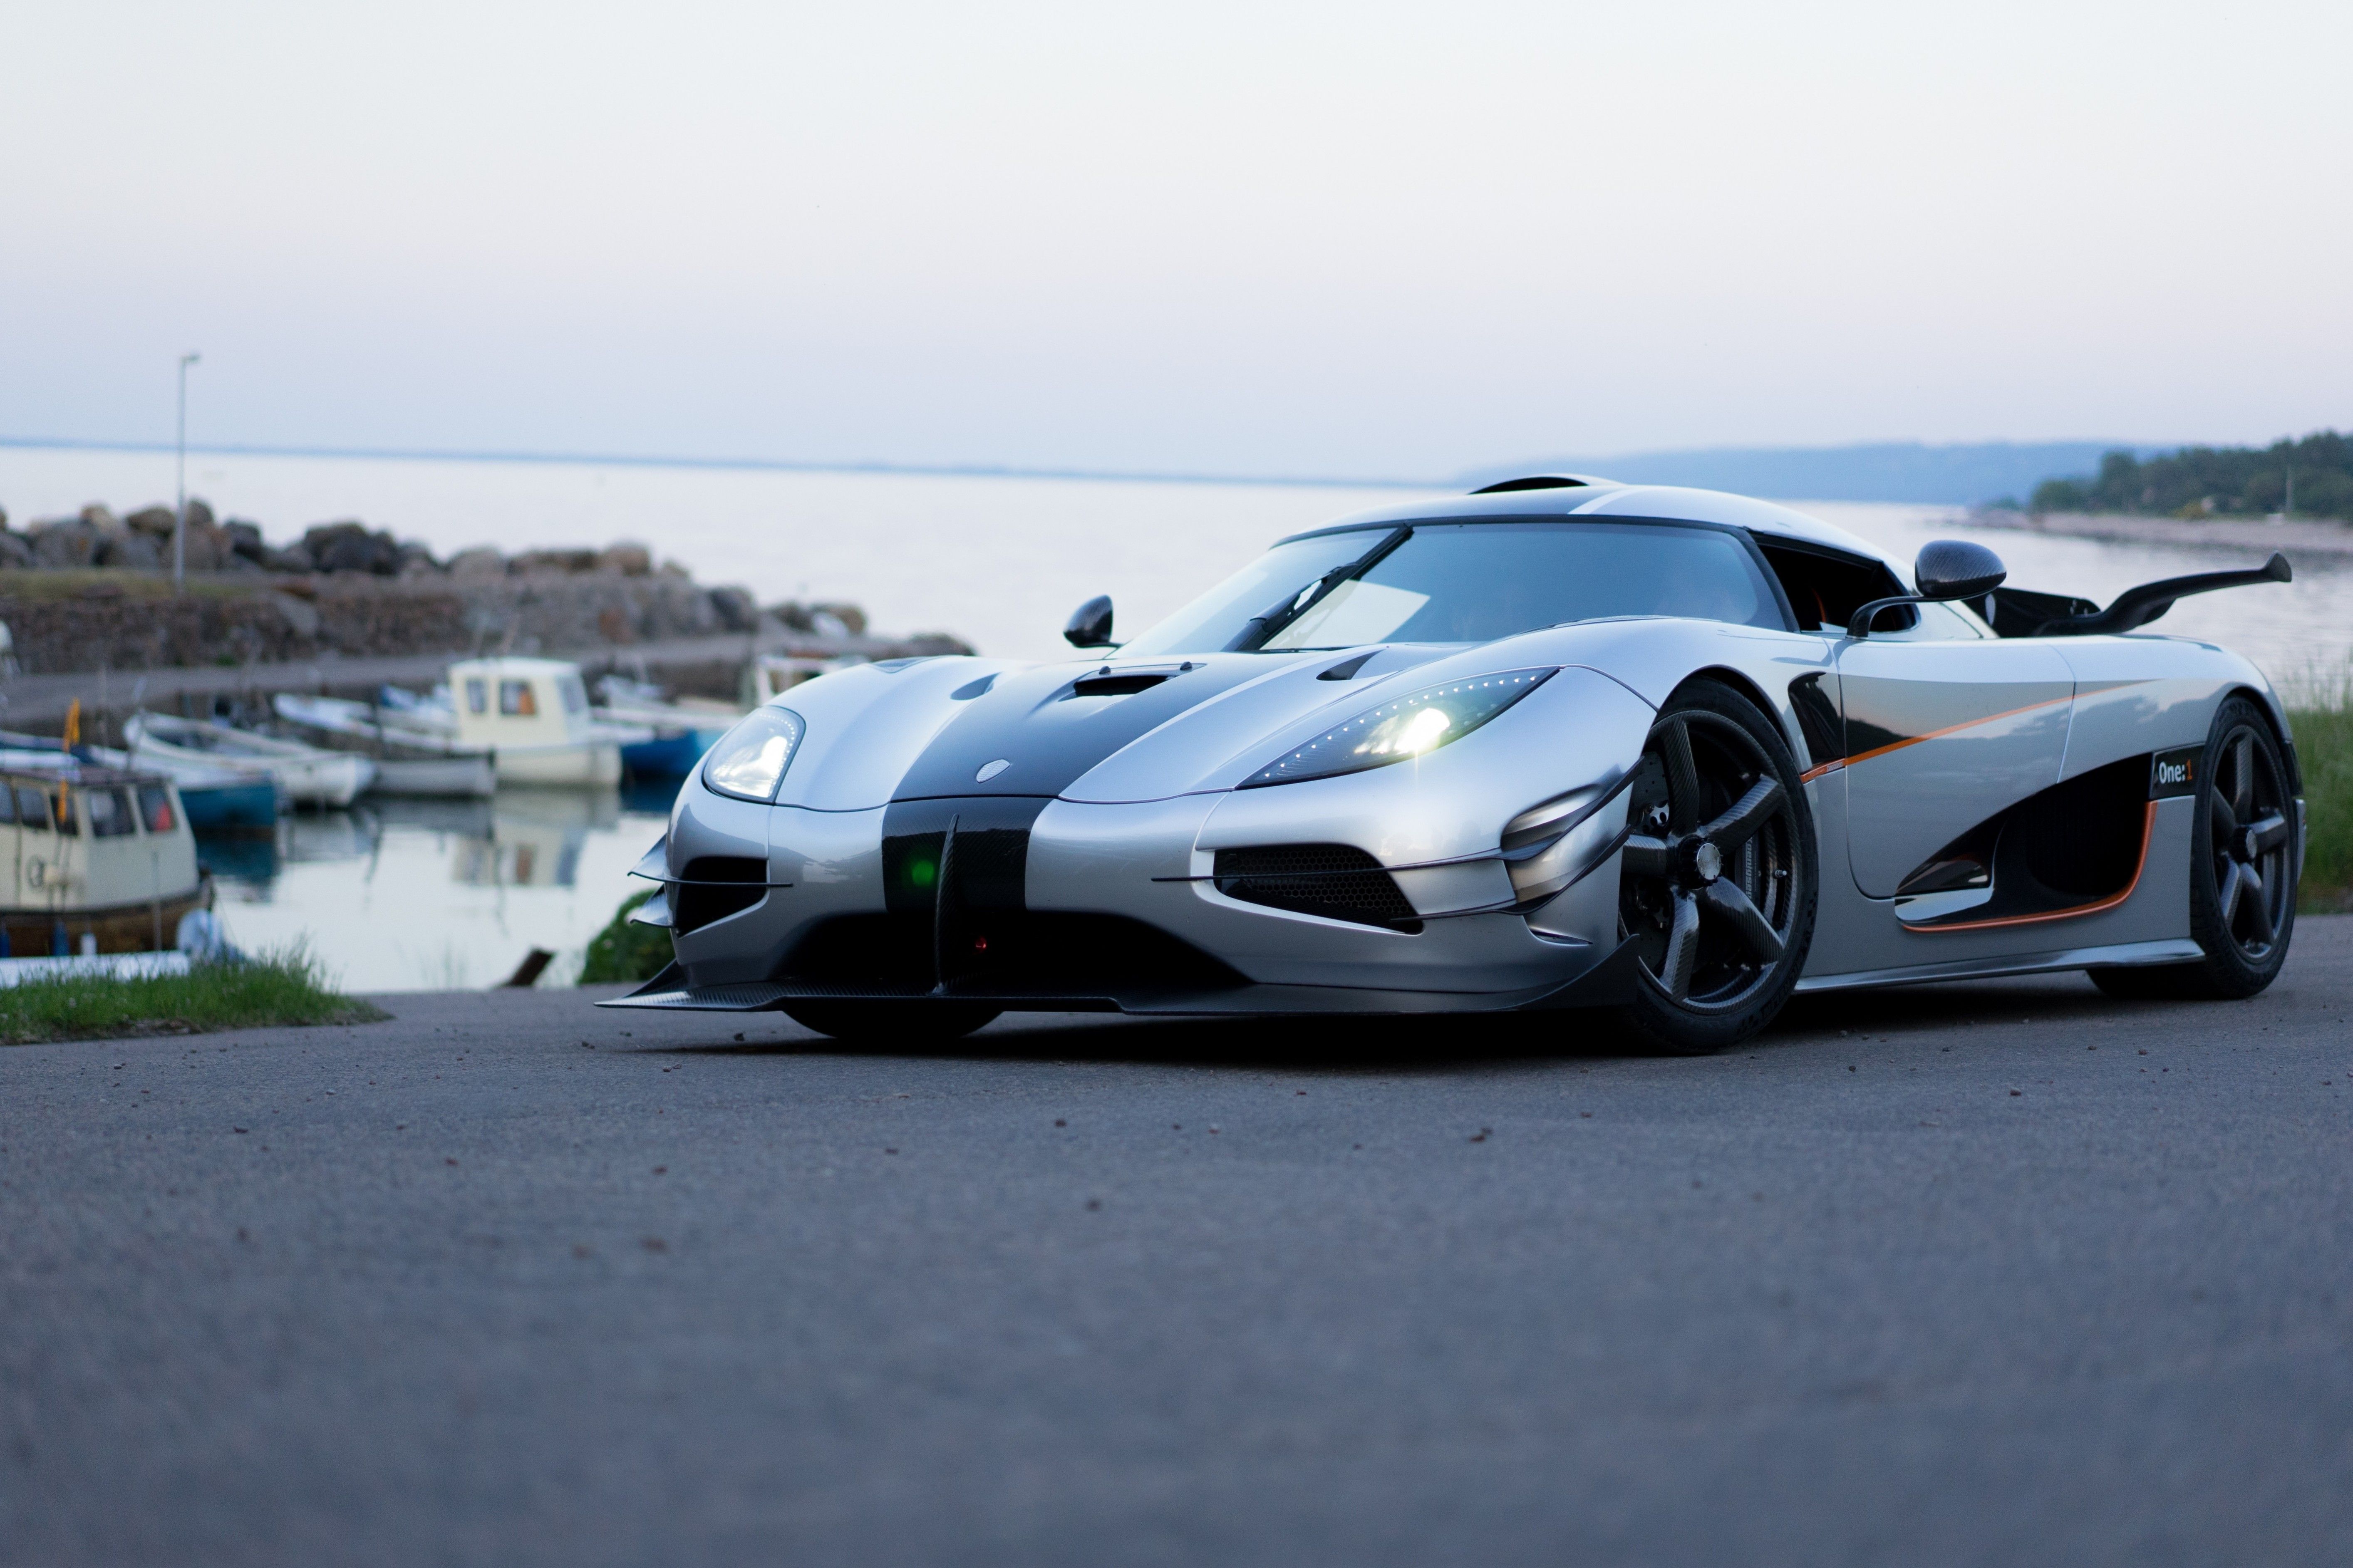 Download 5655x3769 Koenigsegg One: Gray, Side View, Boats, Sport